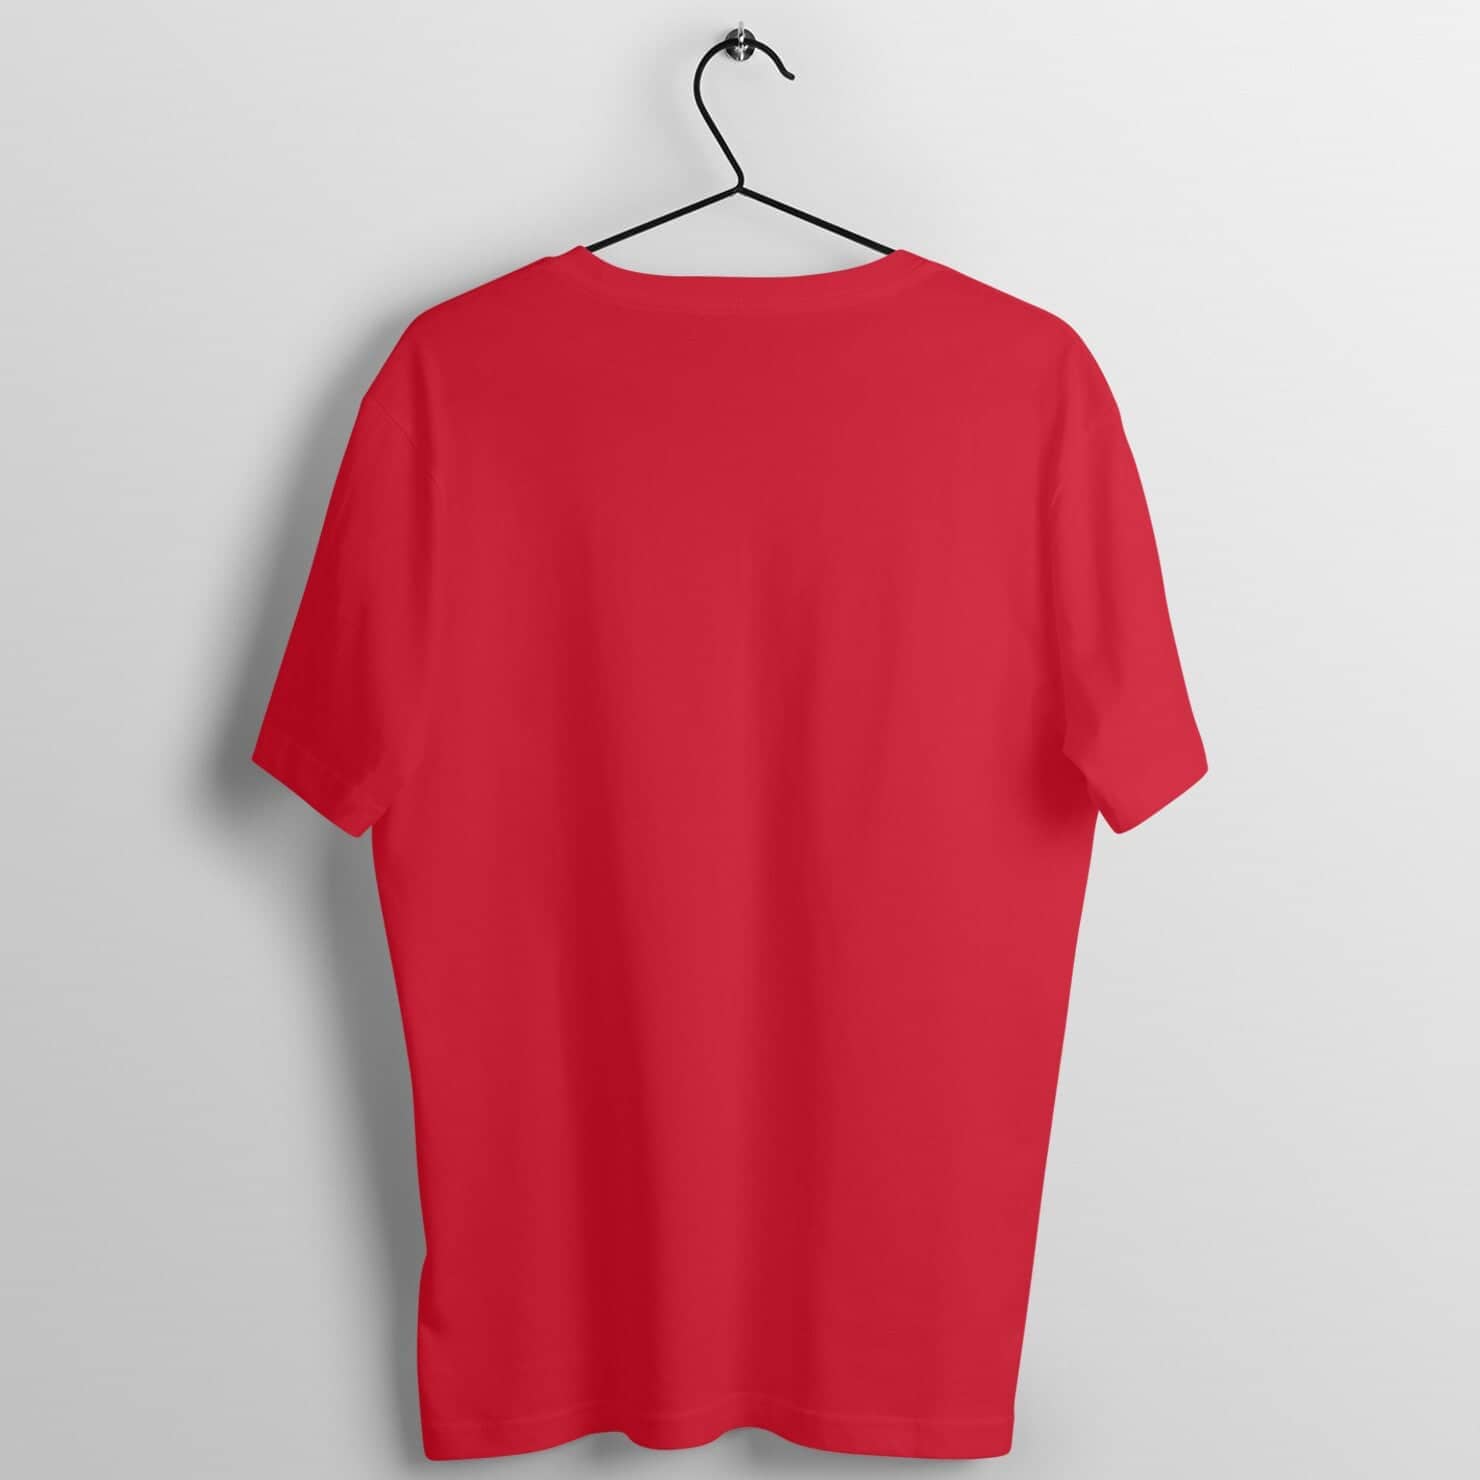 No Talk Me I Angy Special Cuteness Overloaded Red T Shirt for Women freeshipping - Catch My Drift India